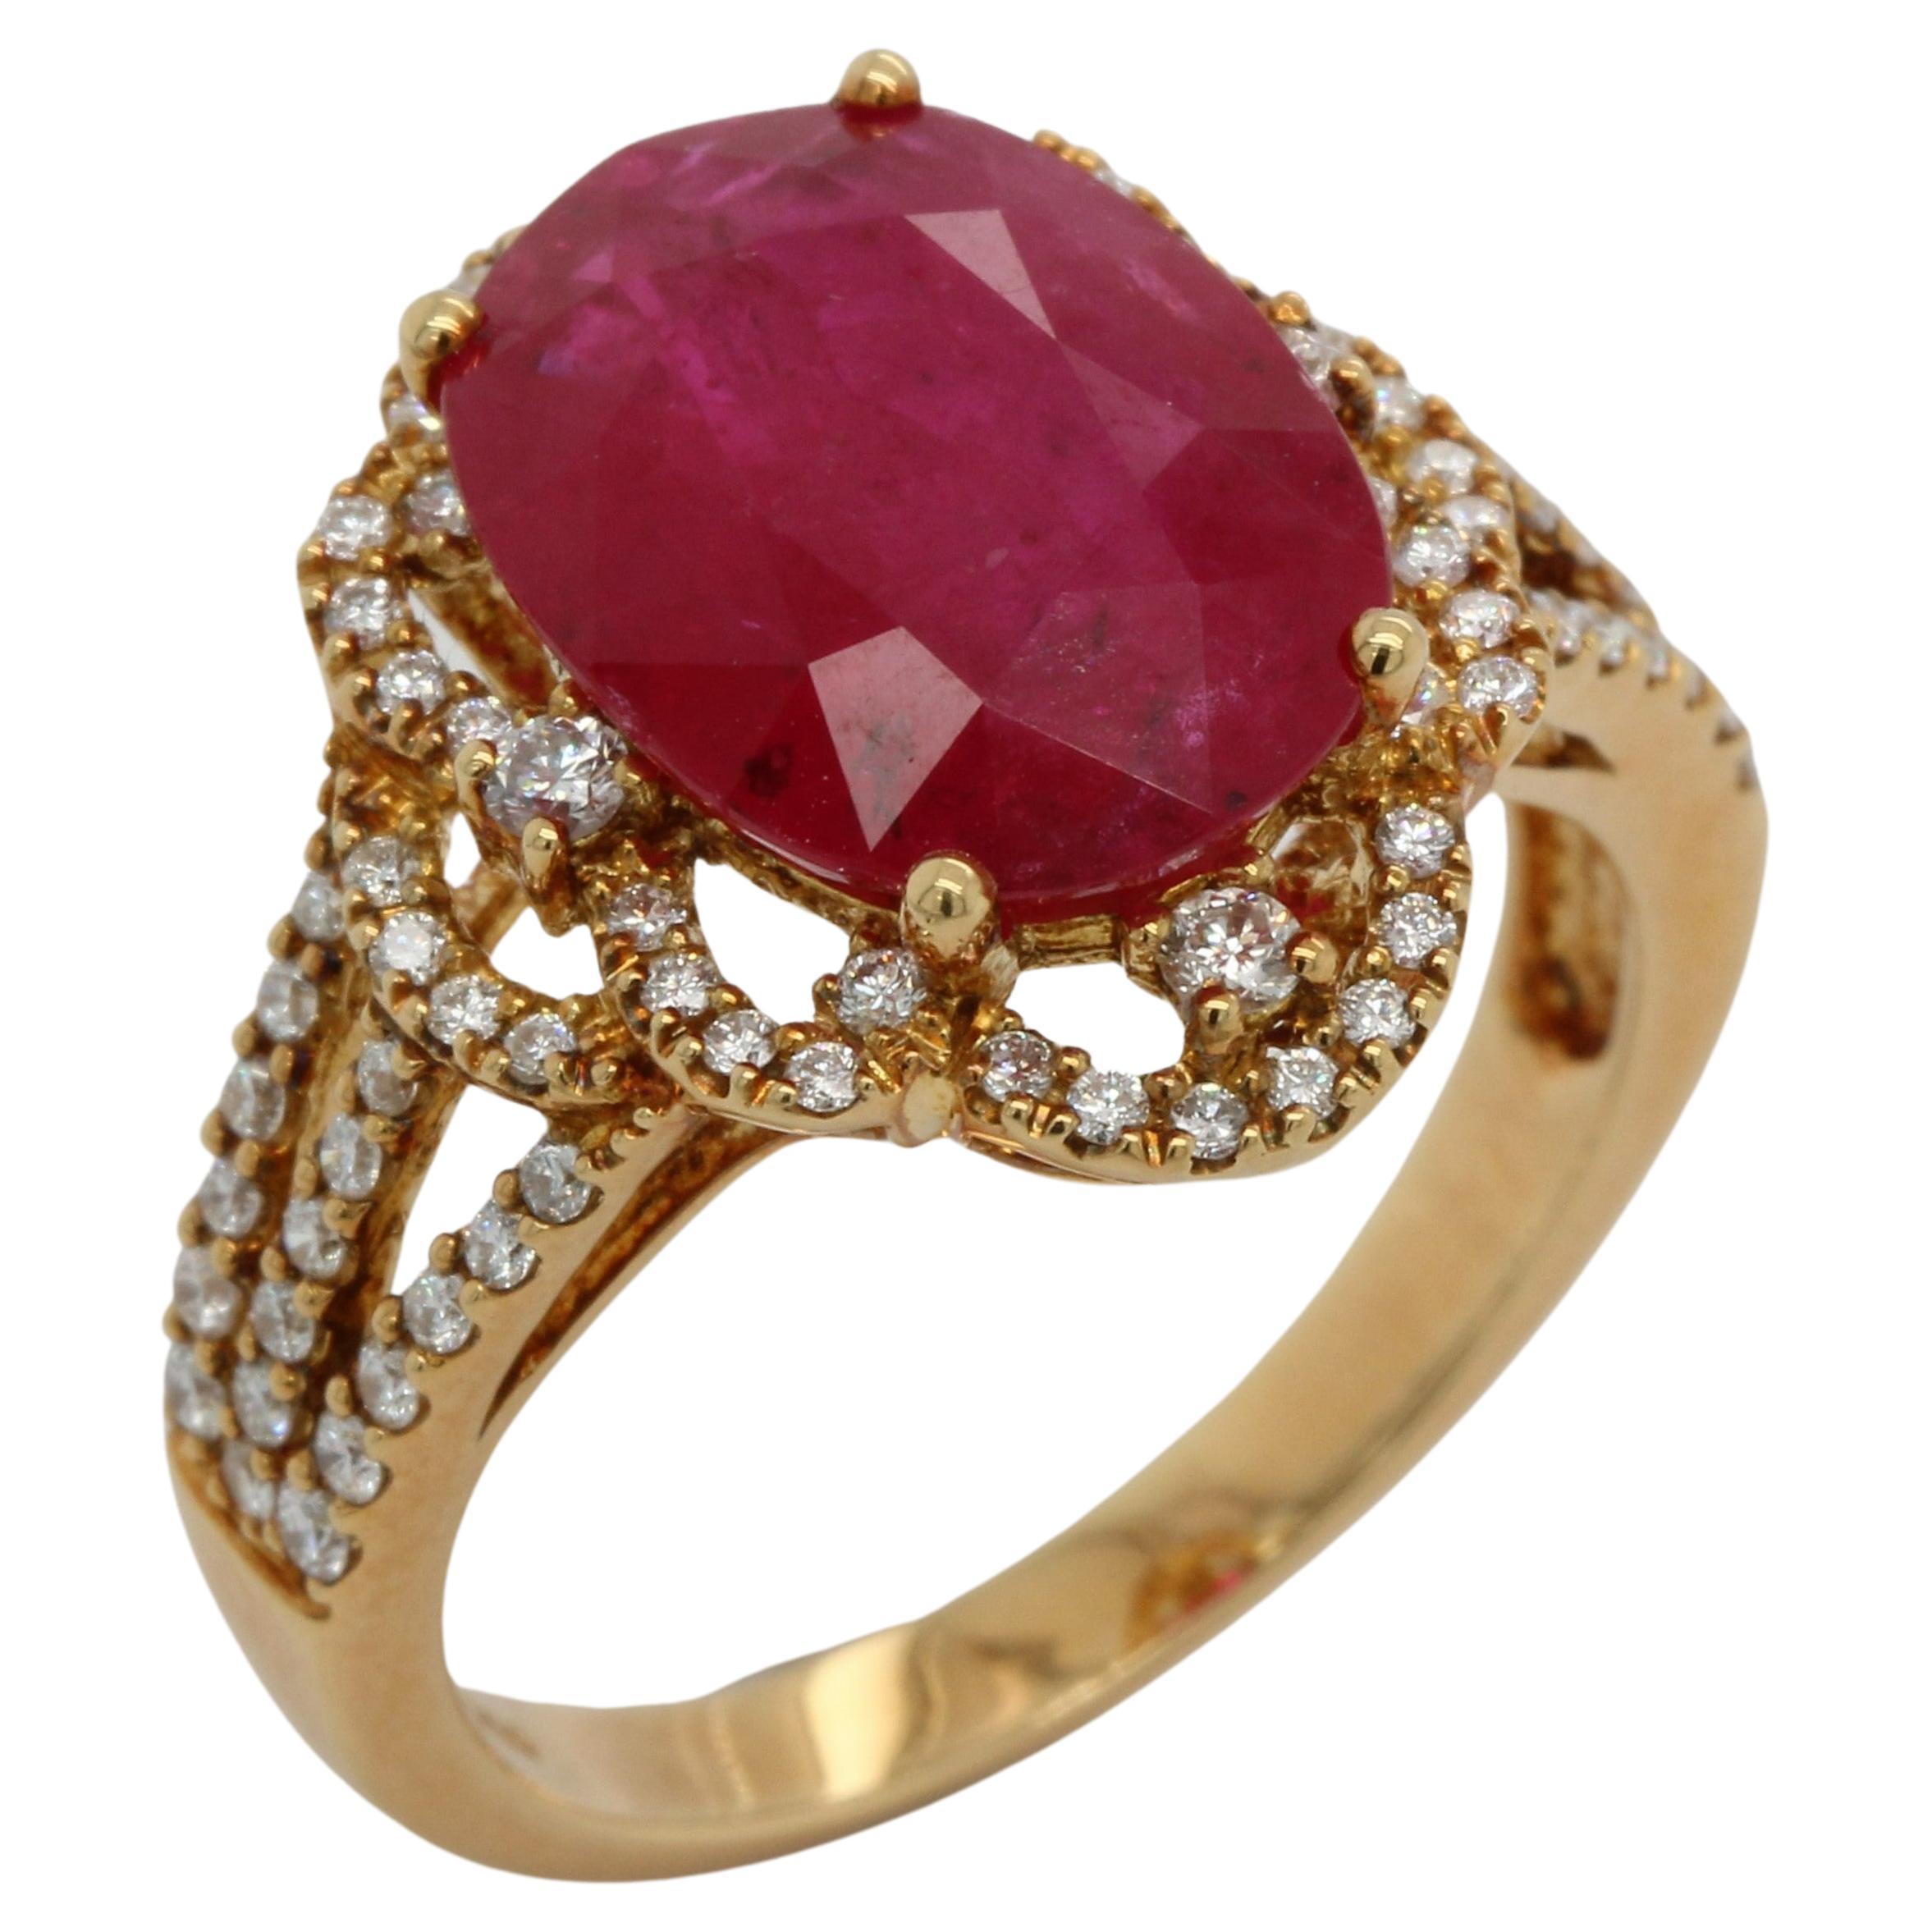 5.19 Carat Ruby And Diamond Ring In 18 Karat Gold For Sale